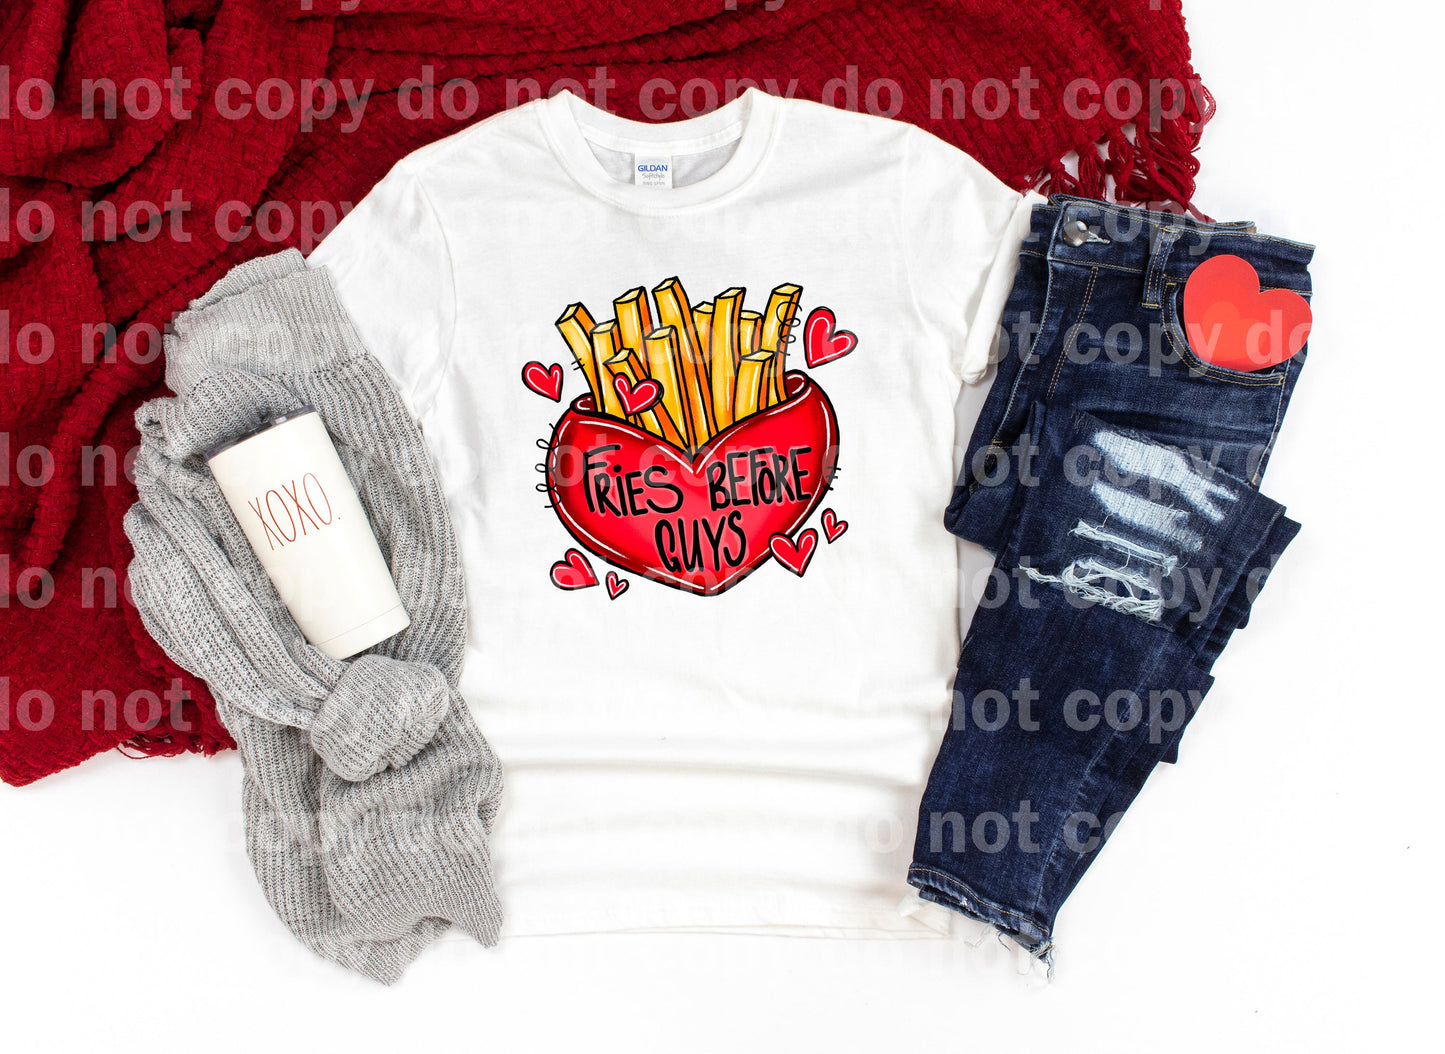 Fries Before Guys Red Heart Dream Print or Sublimation Print